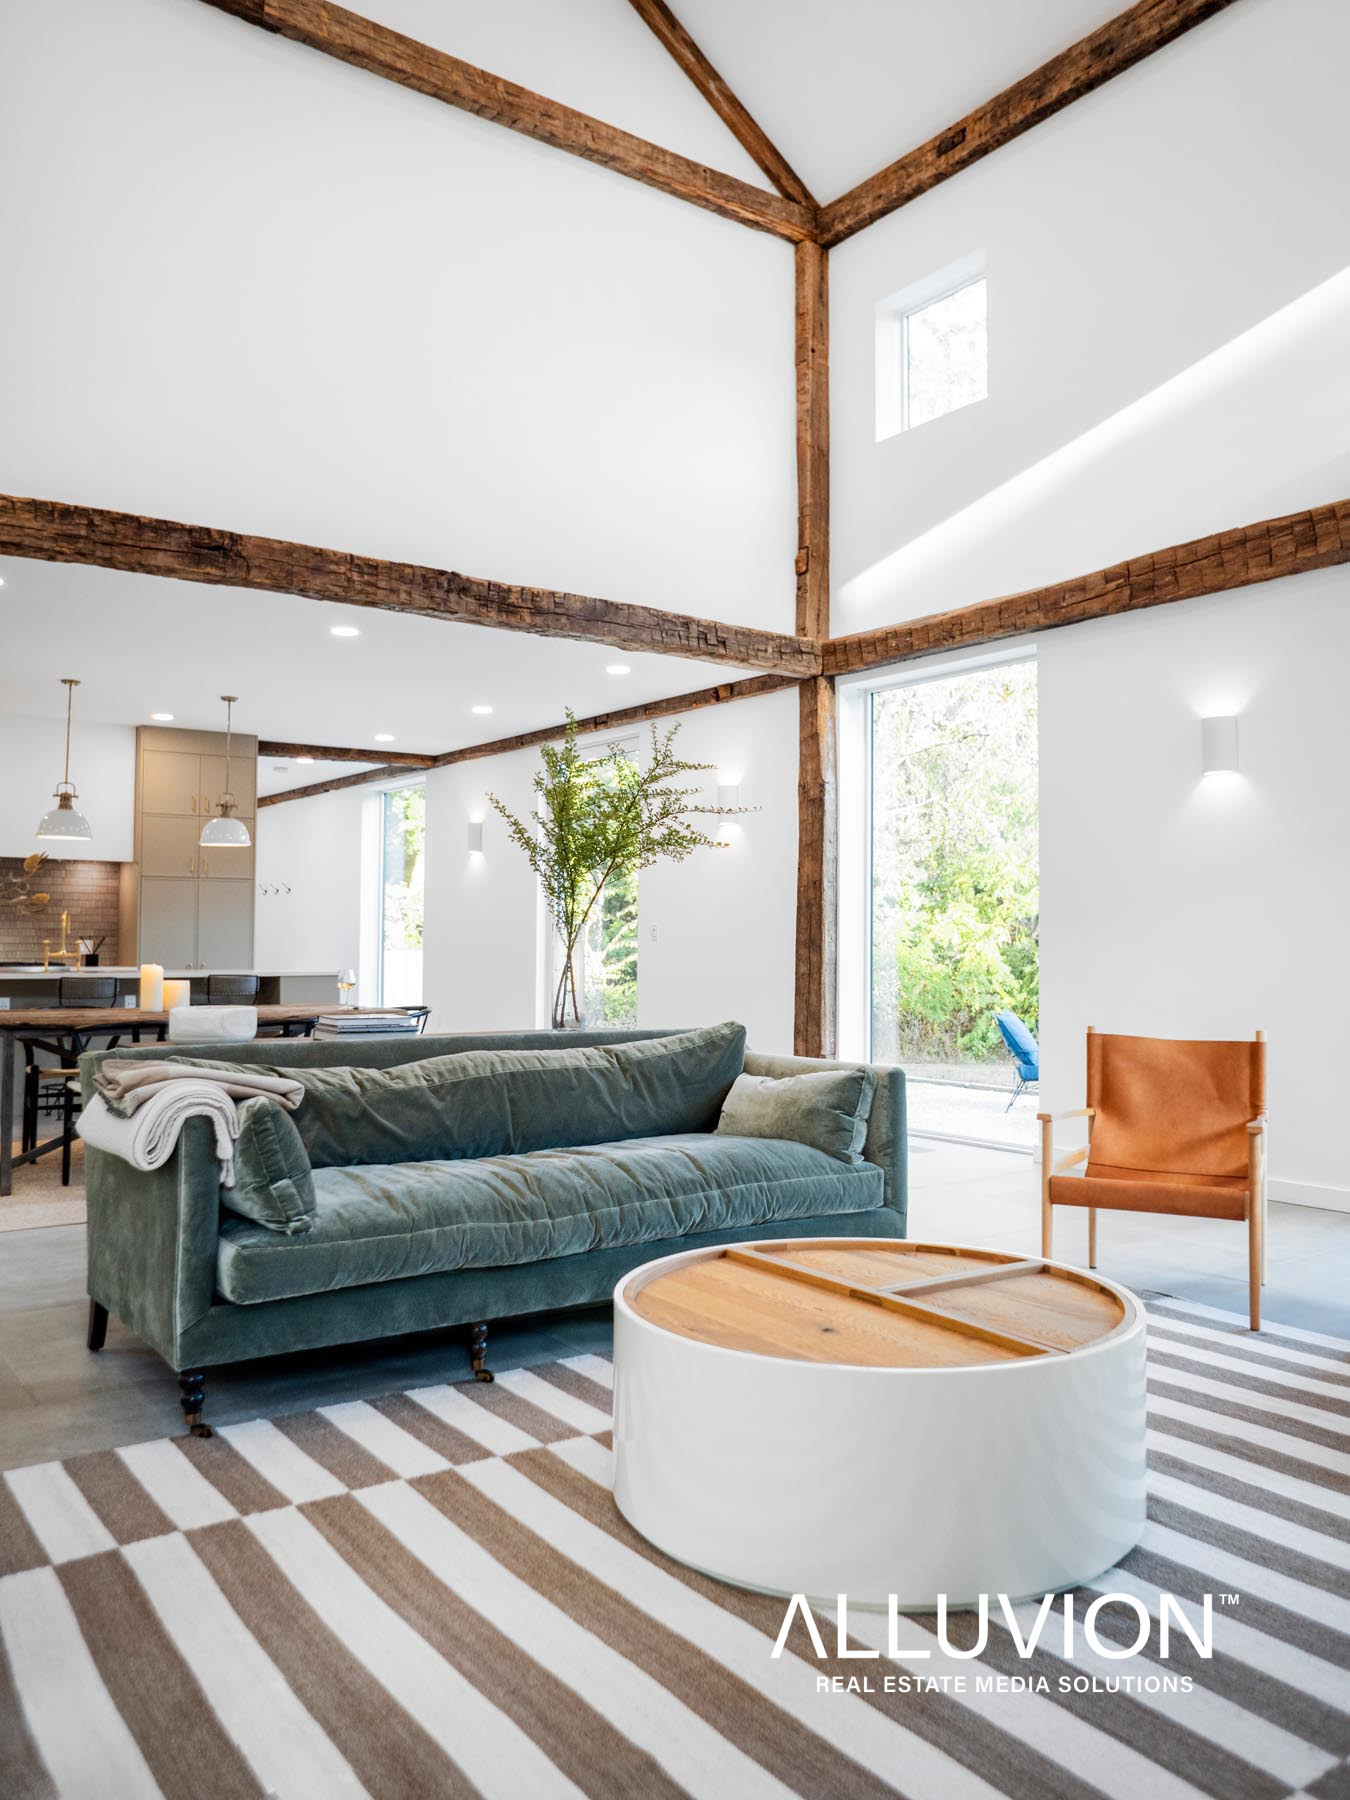 vAirbnb Review of a Converted Barn Overlooking Apsley Hill Farm – Hudson Valley Airbnb Reviews with Photographer Maxwell Alexander – Top Airbnb Listings in the Hudson Valley and Catskills